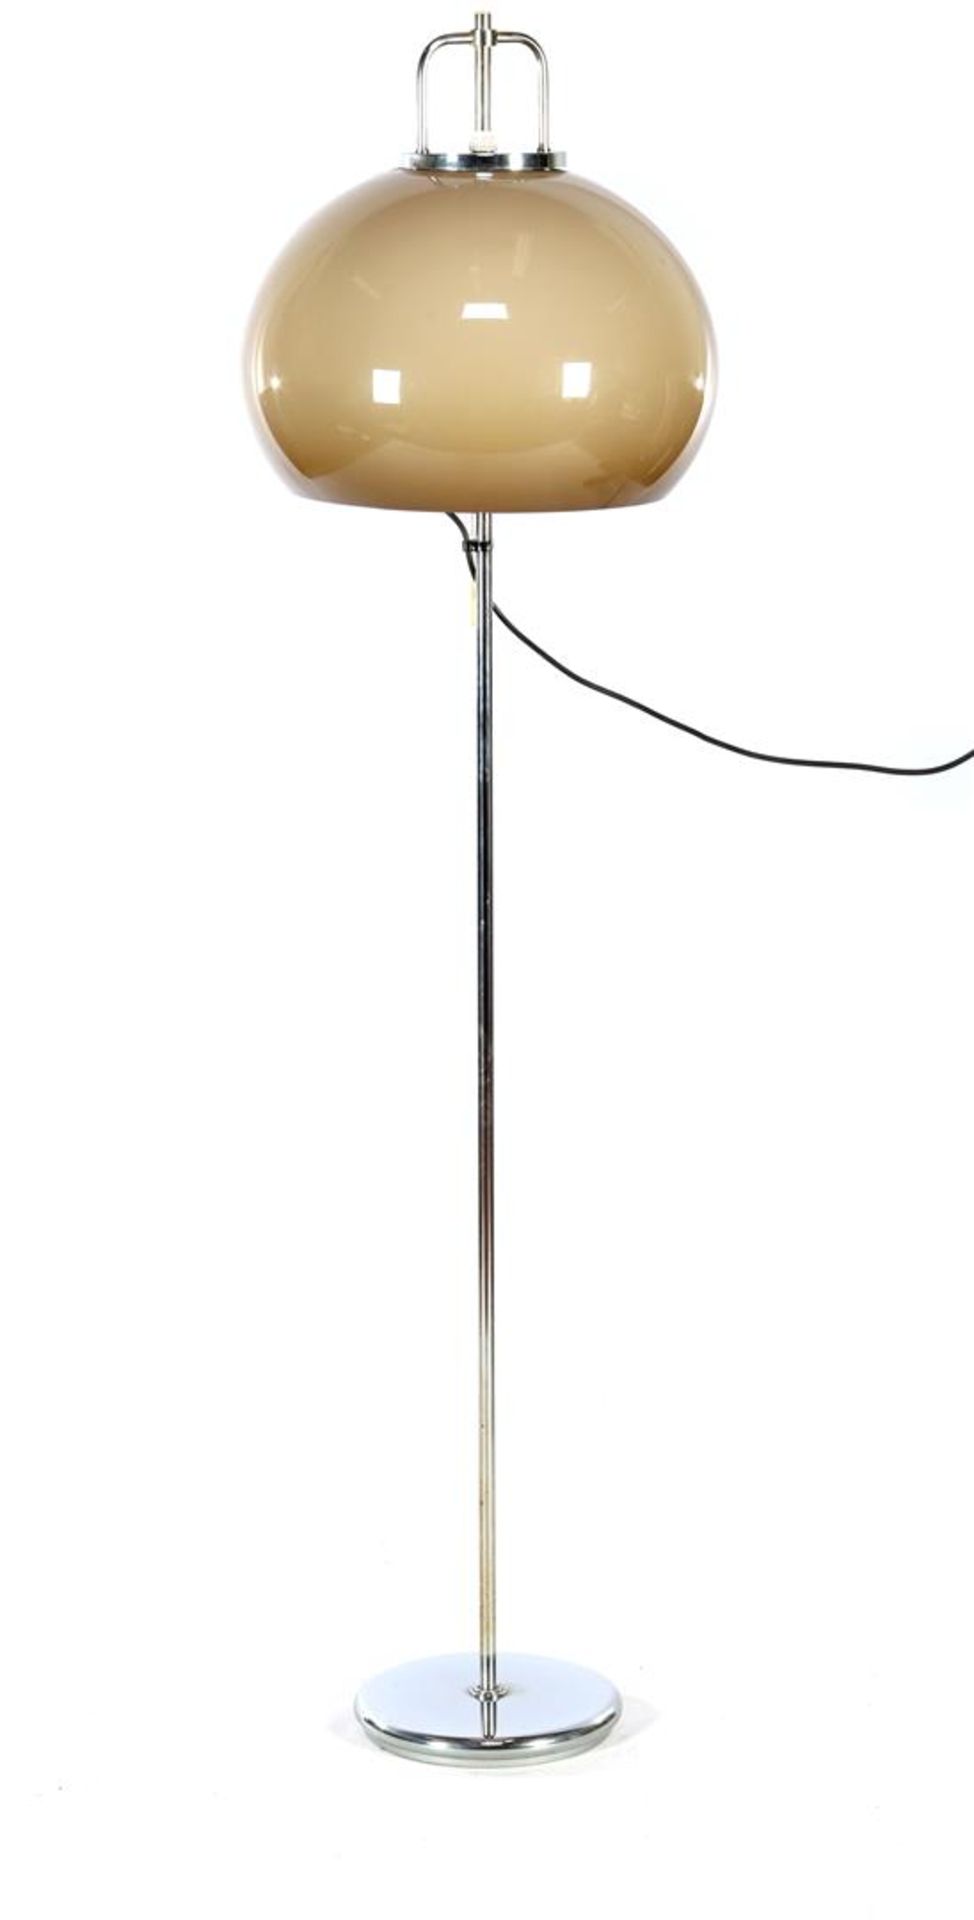 Chrome-plated metal 2-light floor lamp with plastic shade